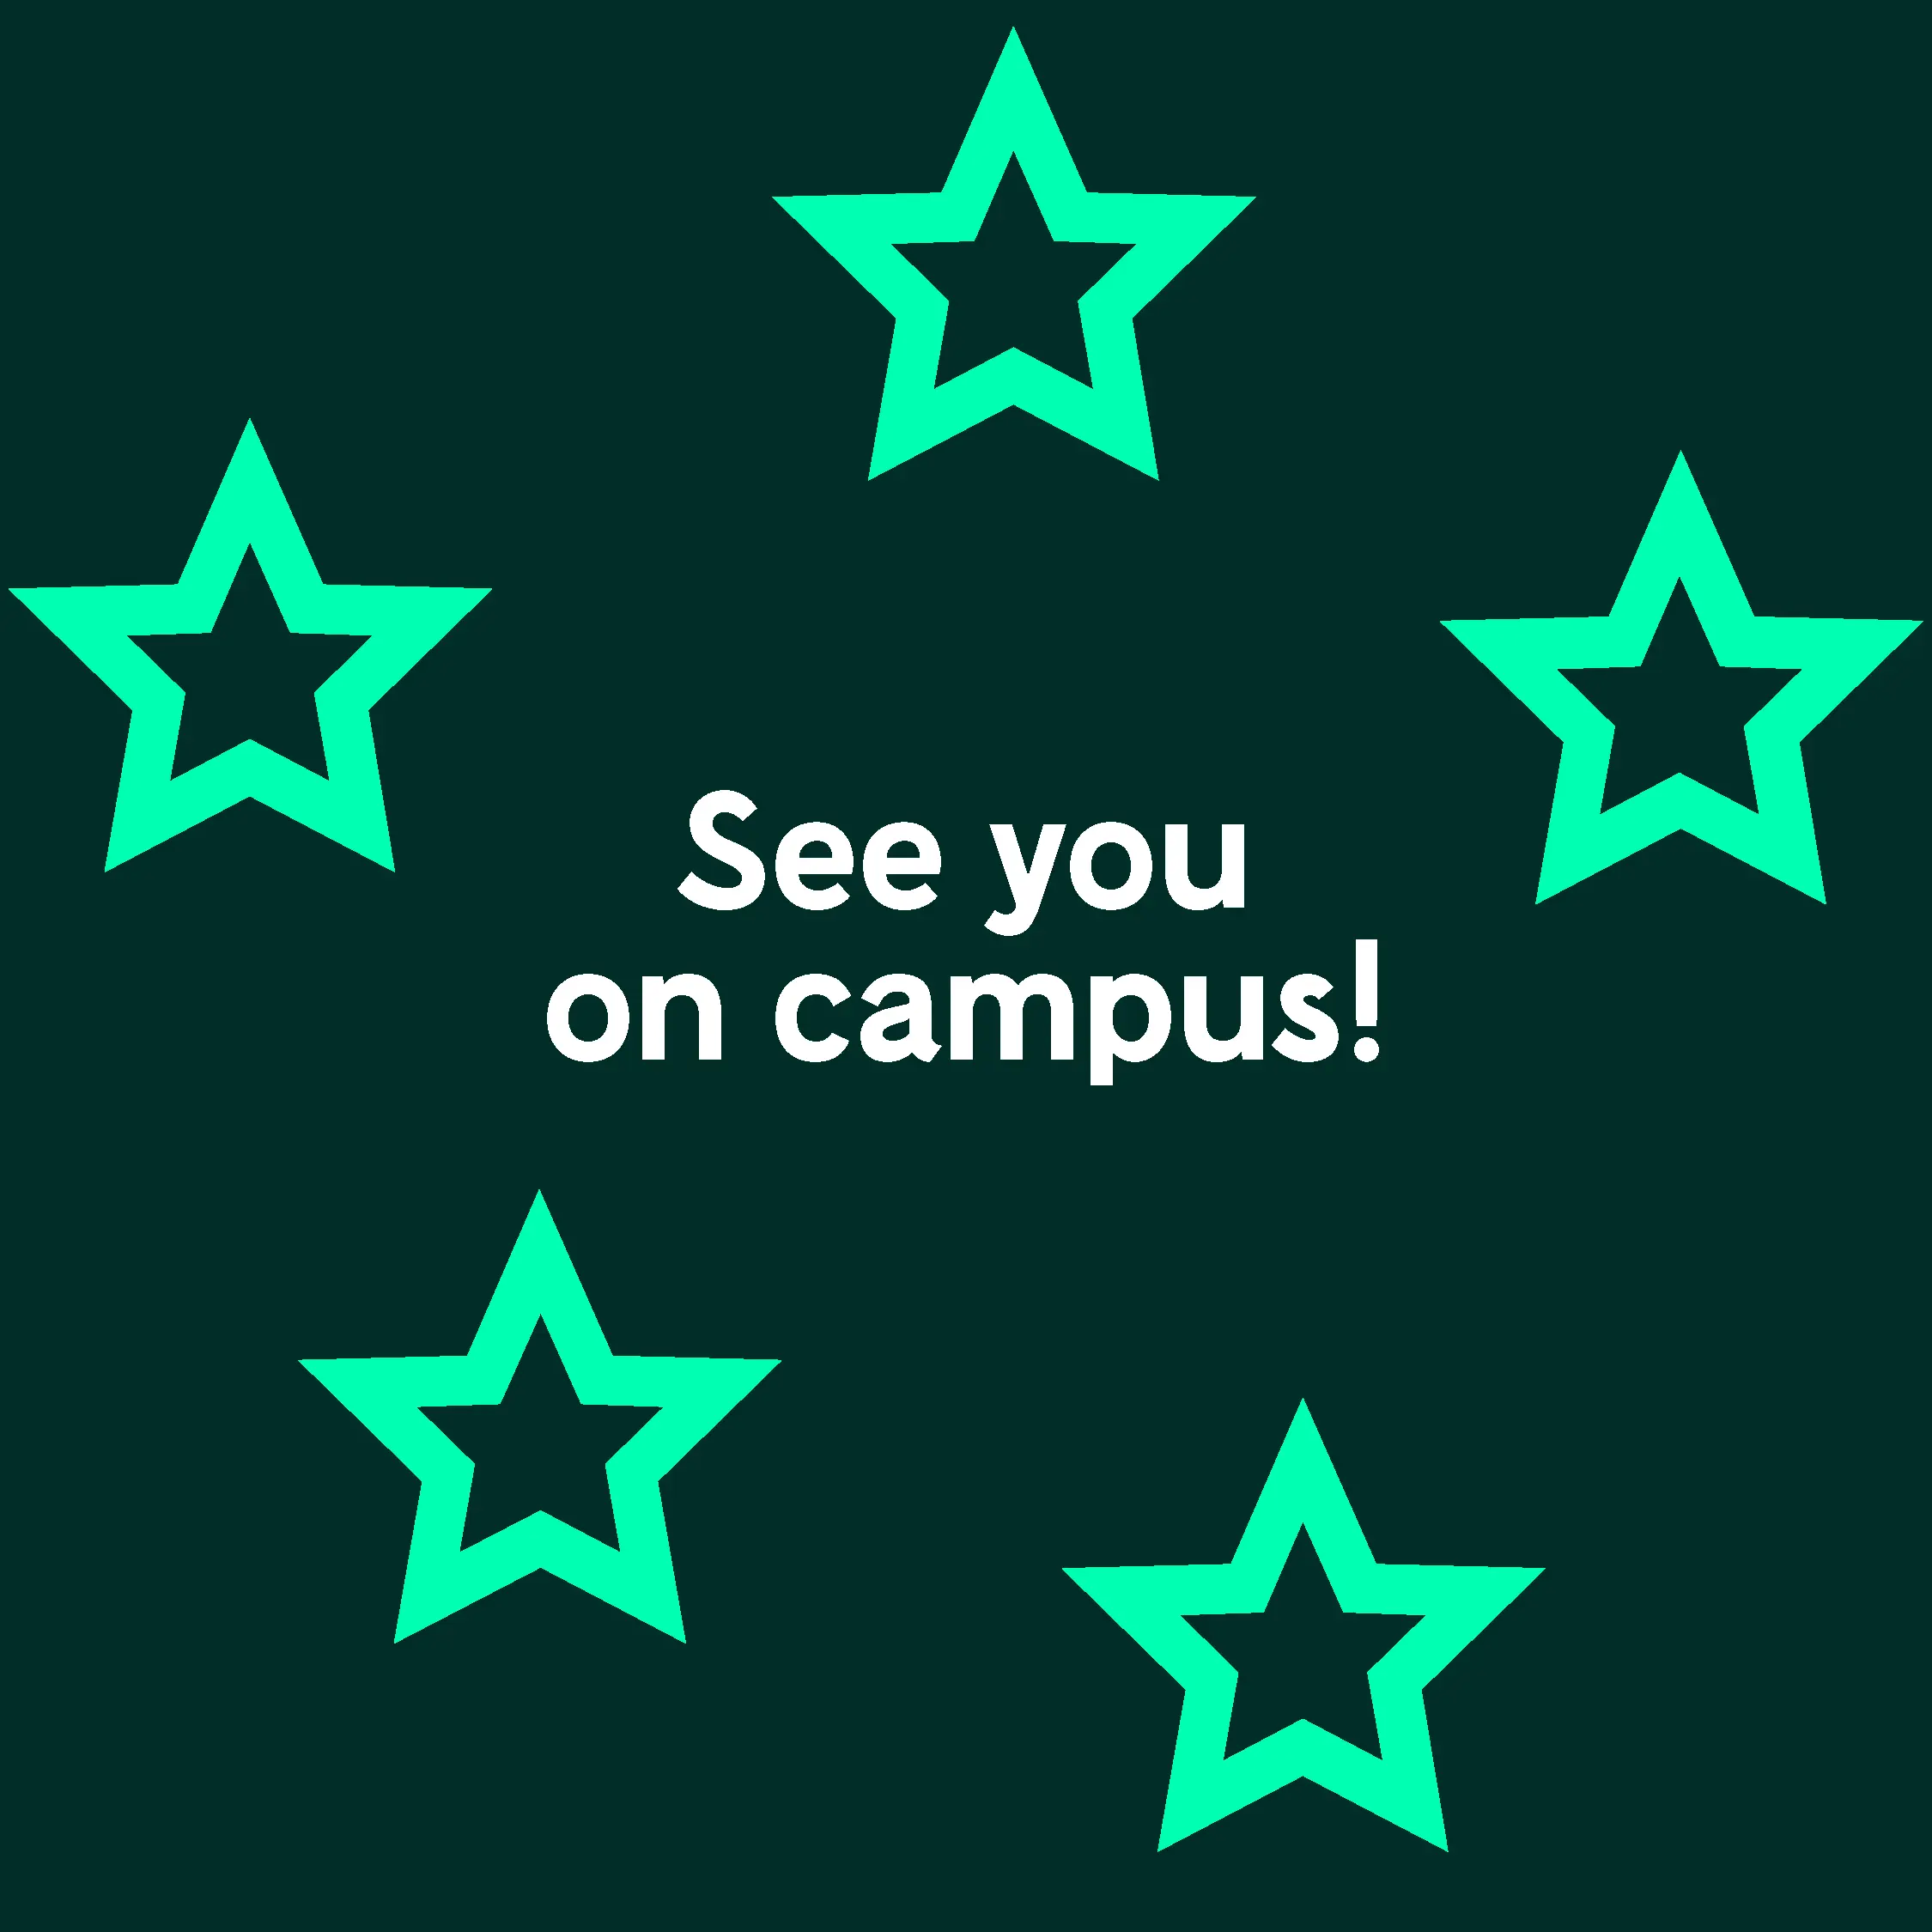 See you on campus!